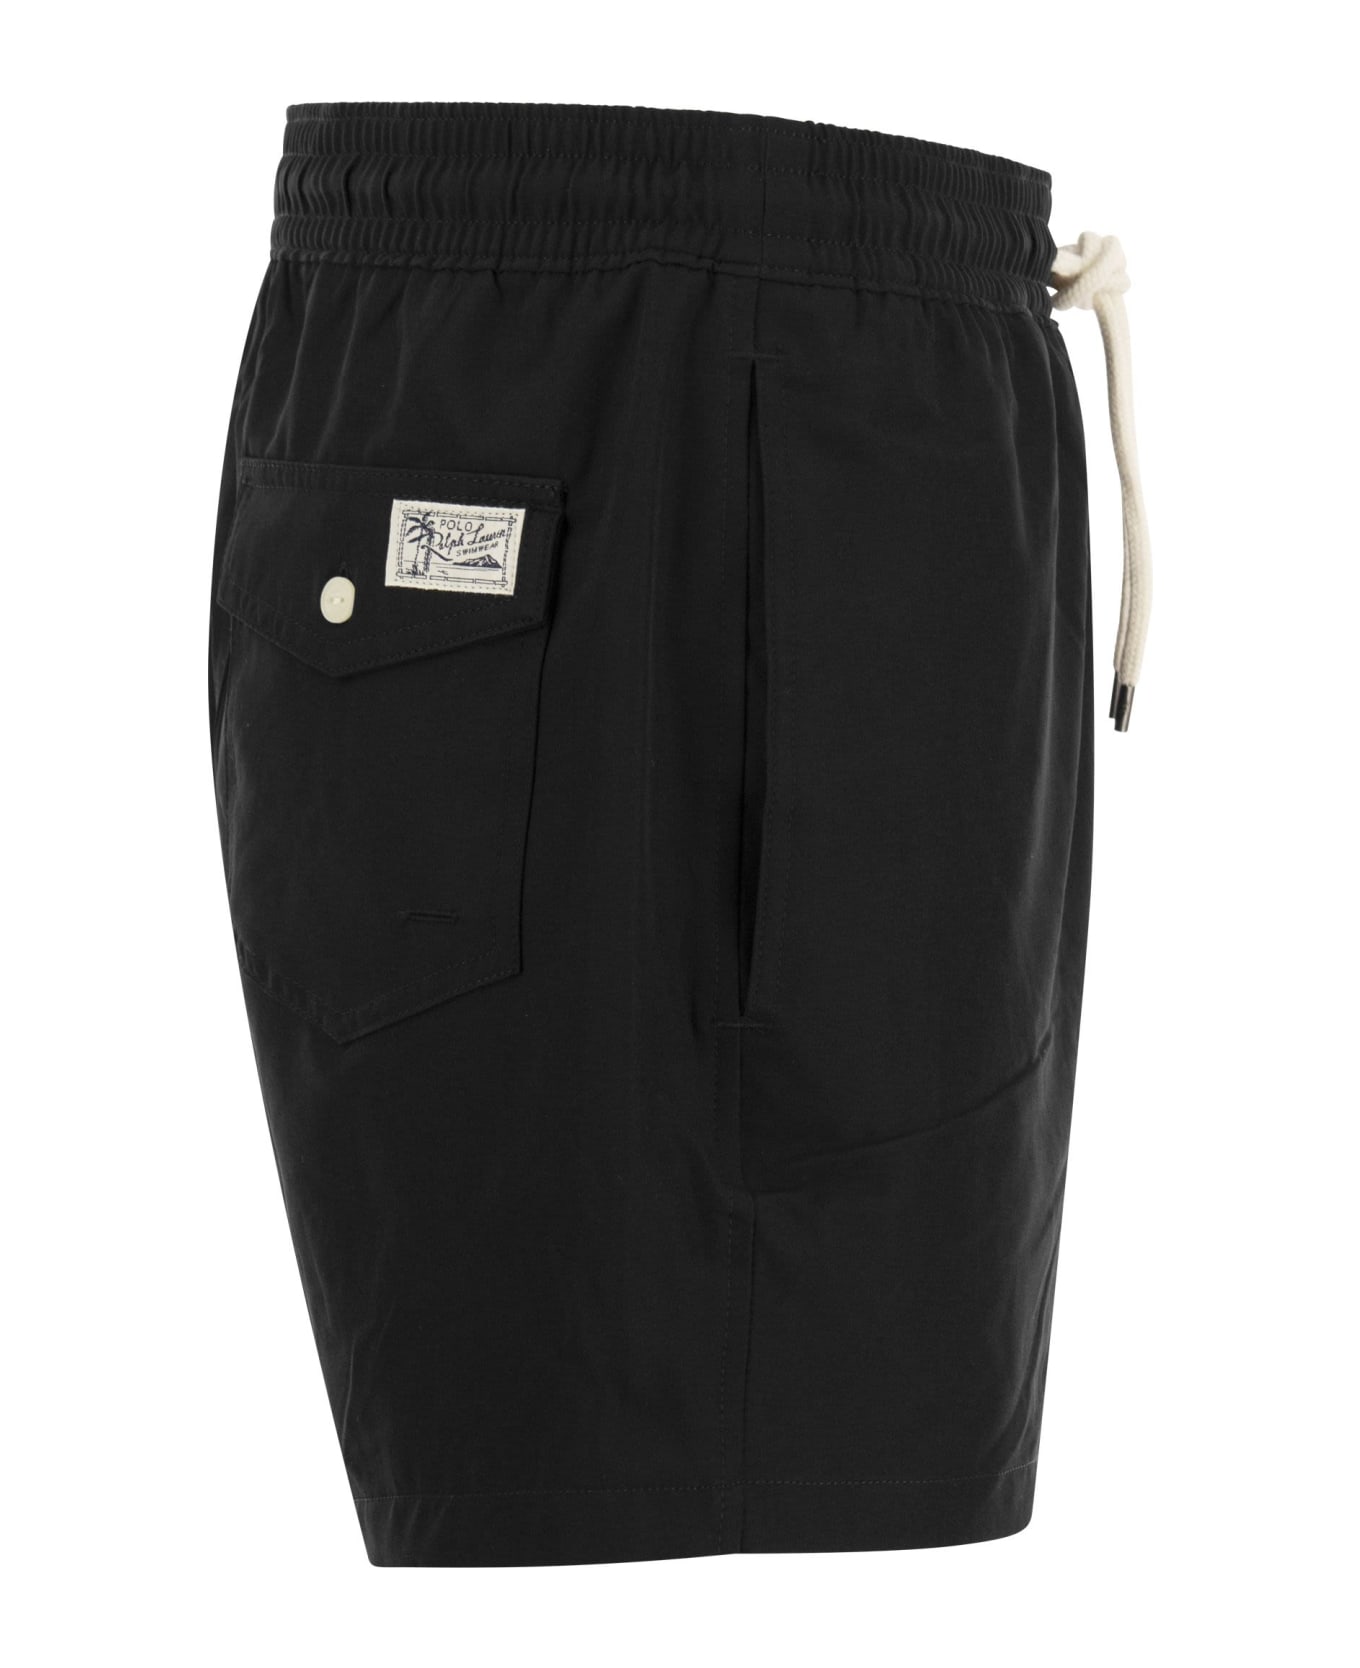 Polo Ralph Lauren Black Stretch Polyester Swimming Shorts - POLOBLK